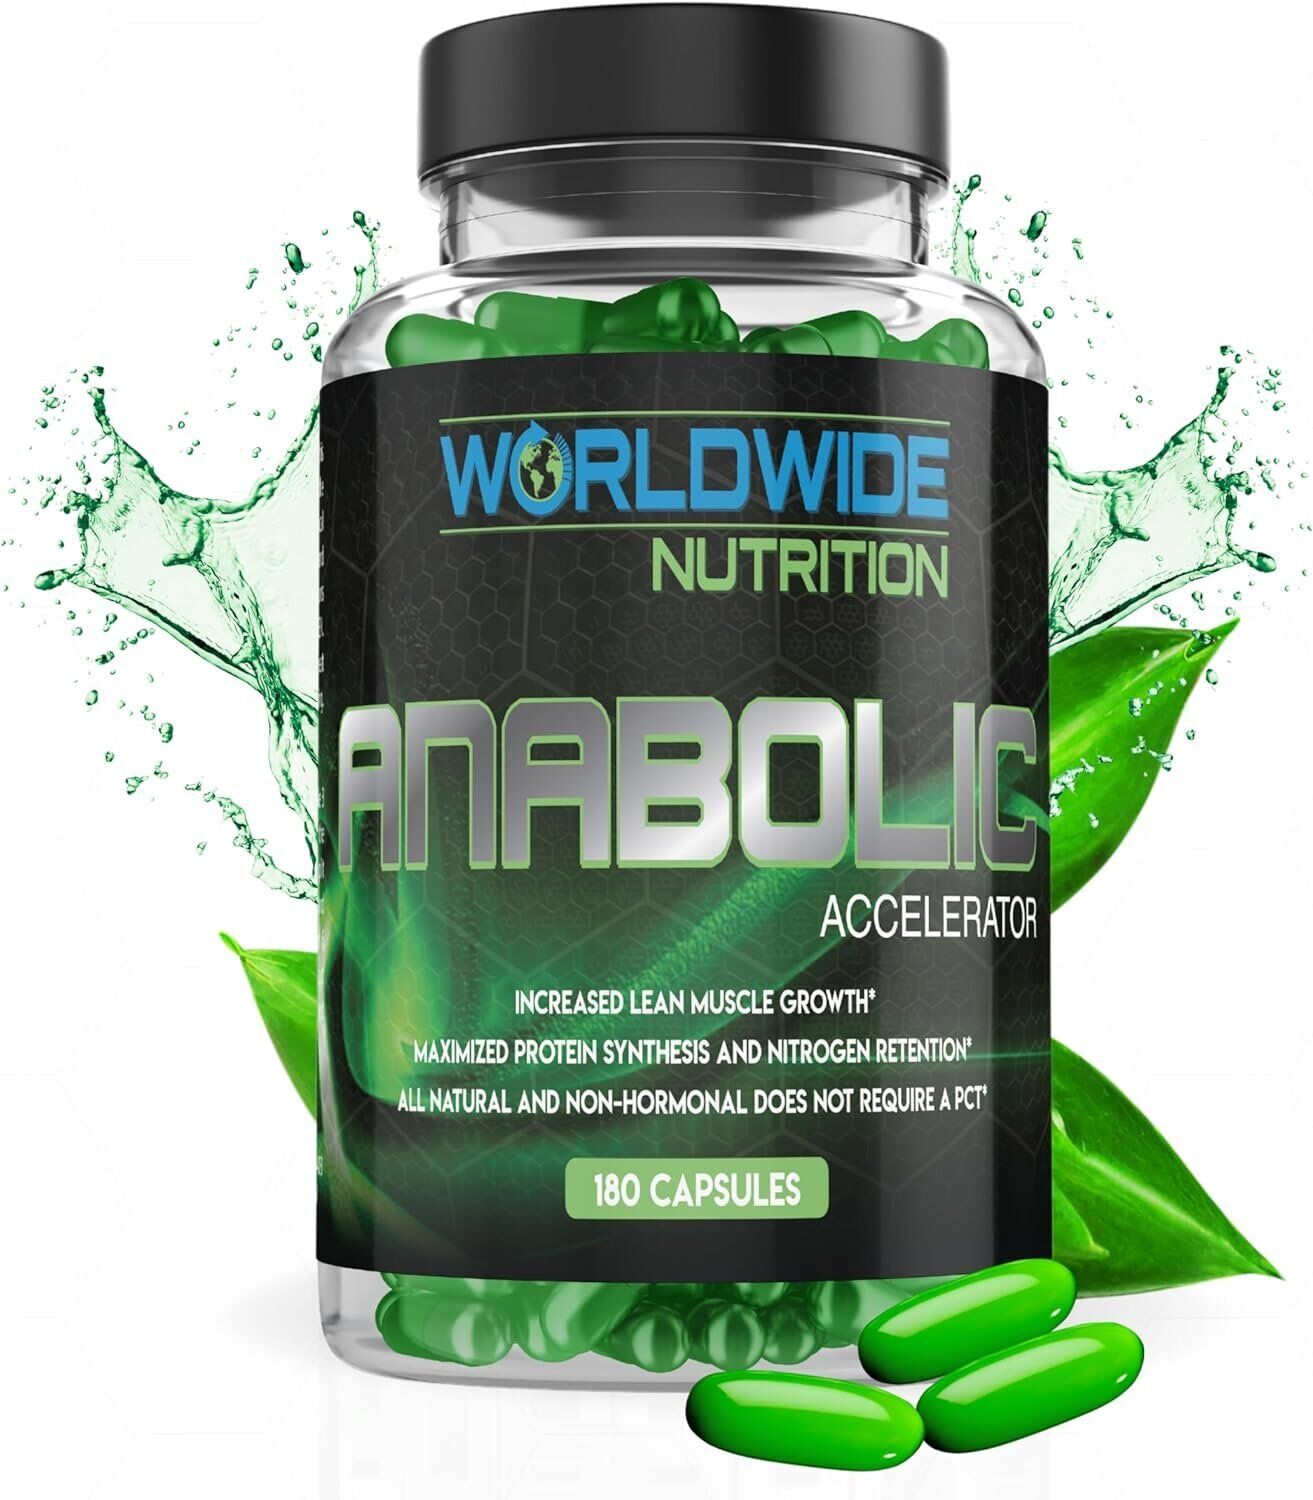 Worldwide Nutrition Anabolic Accelerator Vitamin Supplement - Ignite Your...